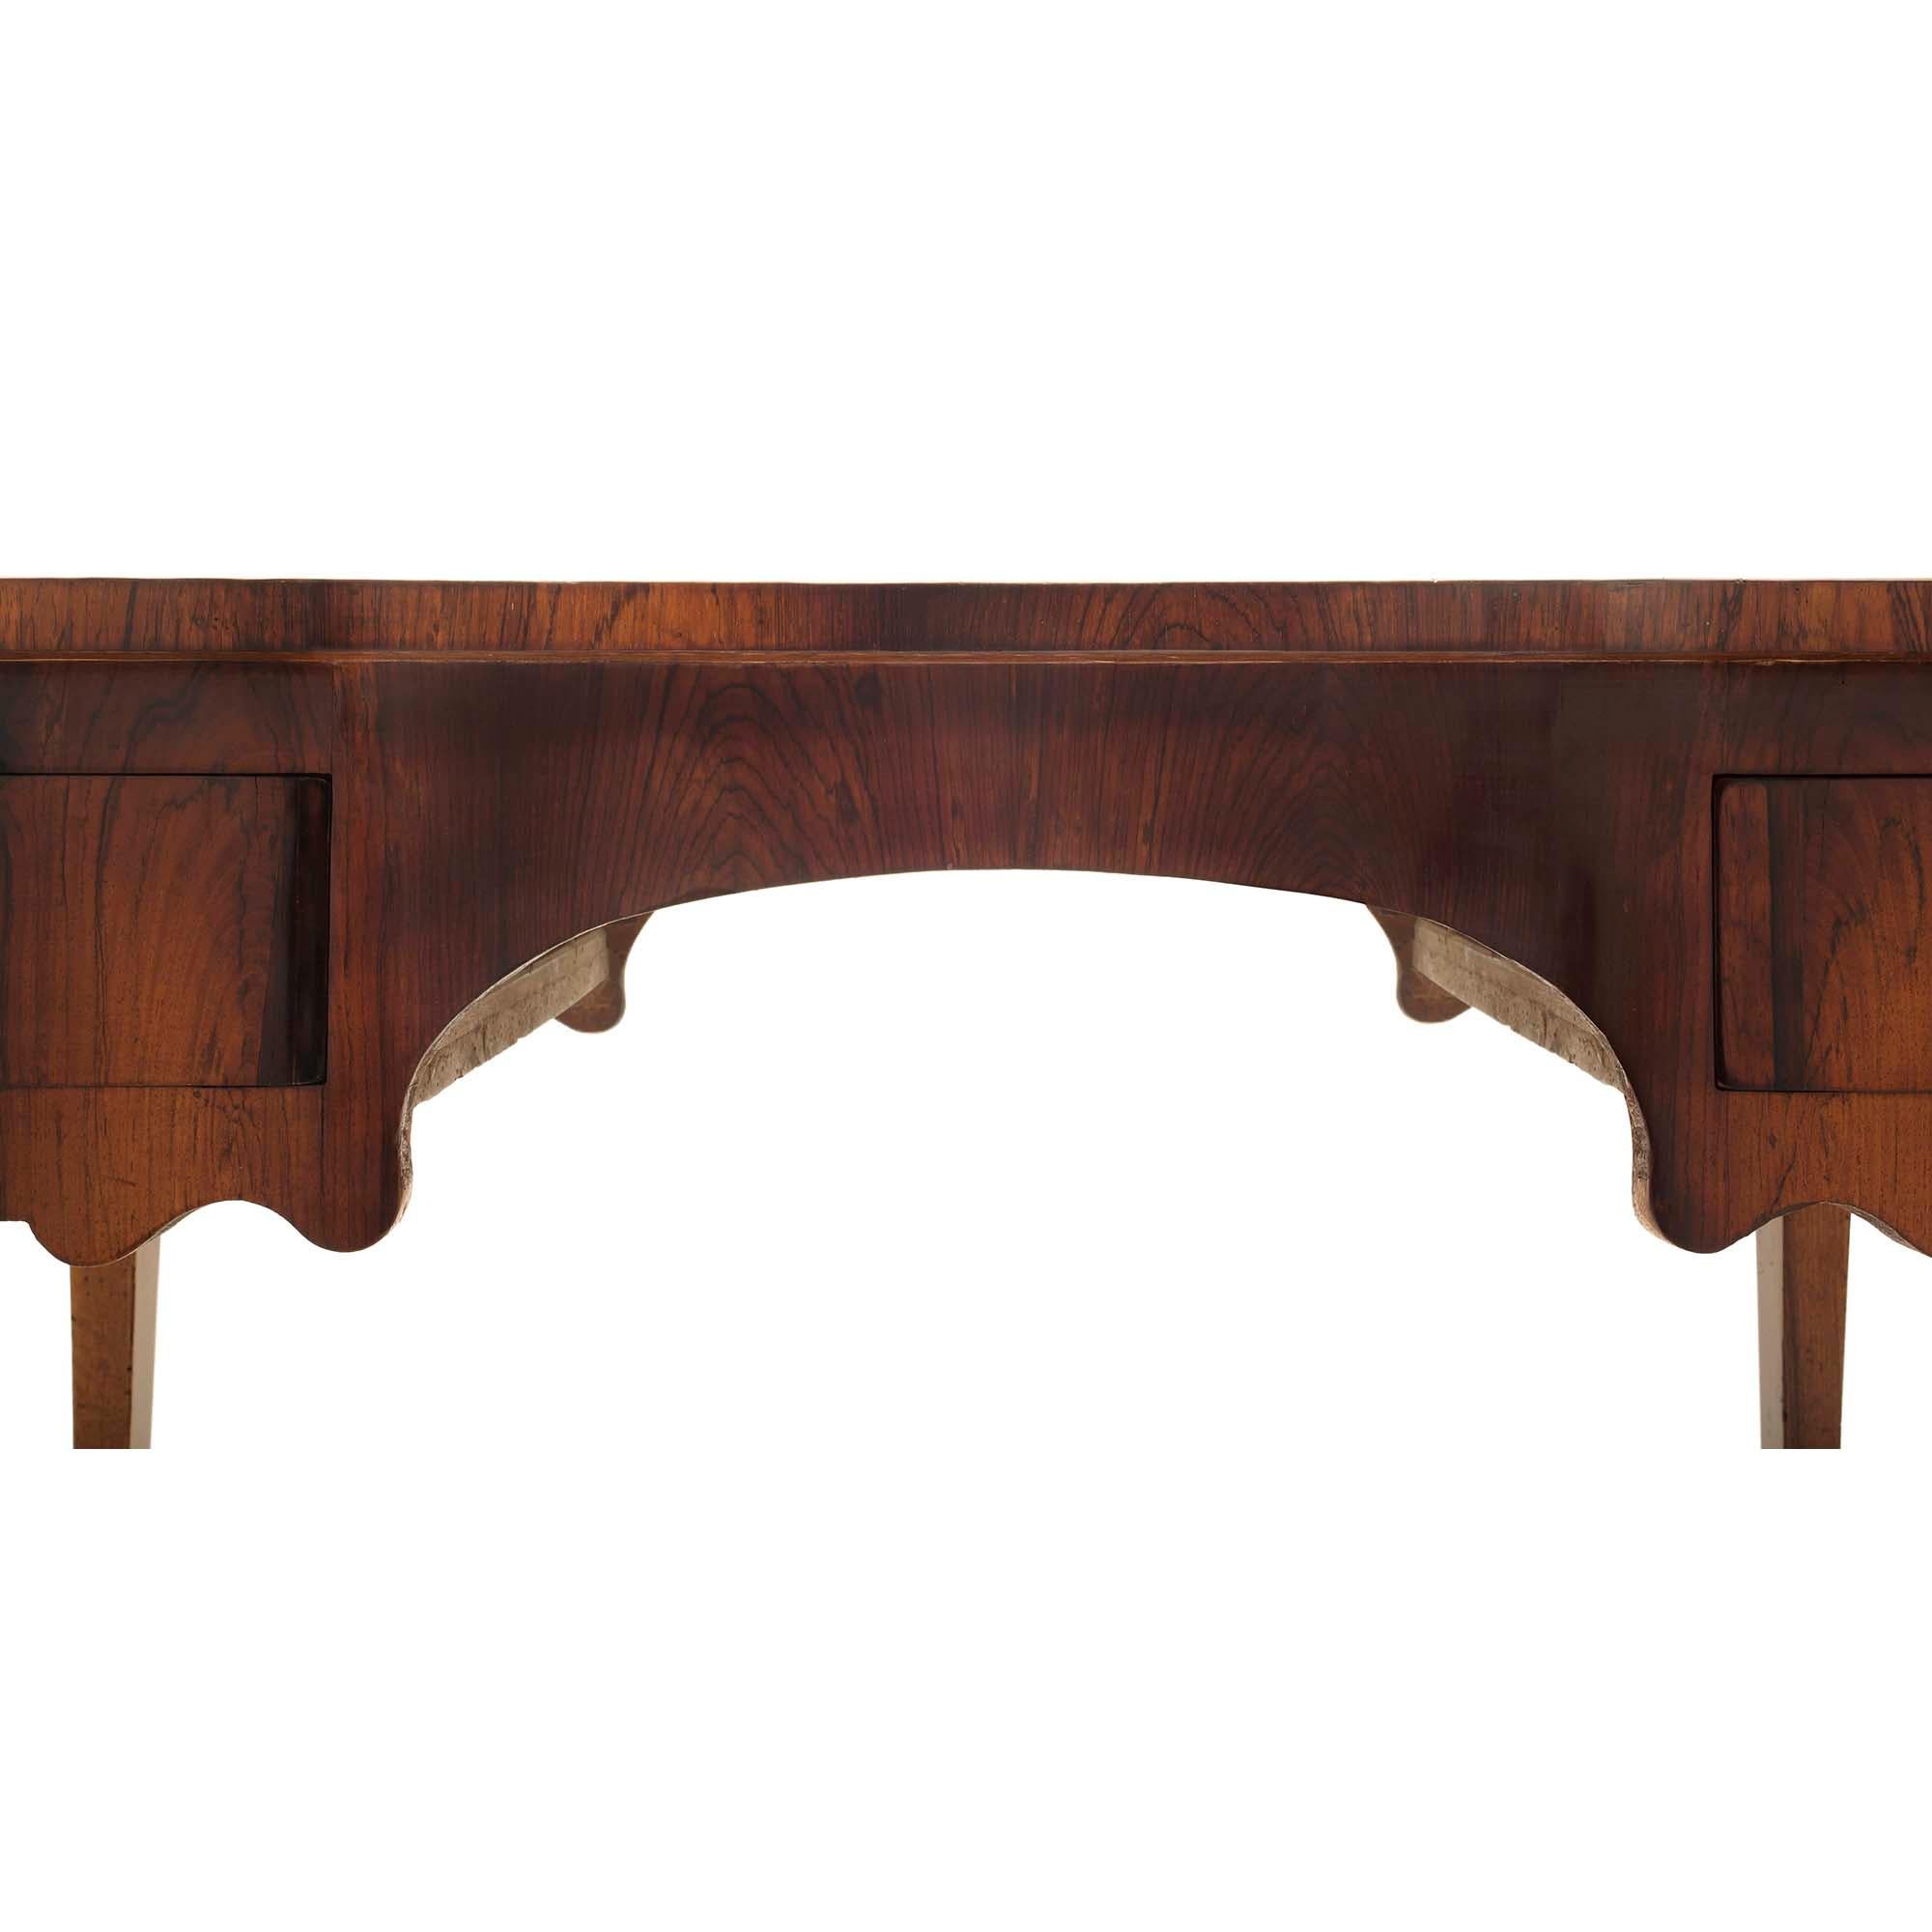 Italian 18th Century Walnut and Rosewood Tuscan Desk For Sale 1